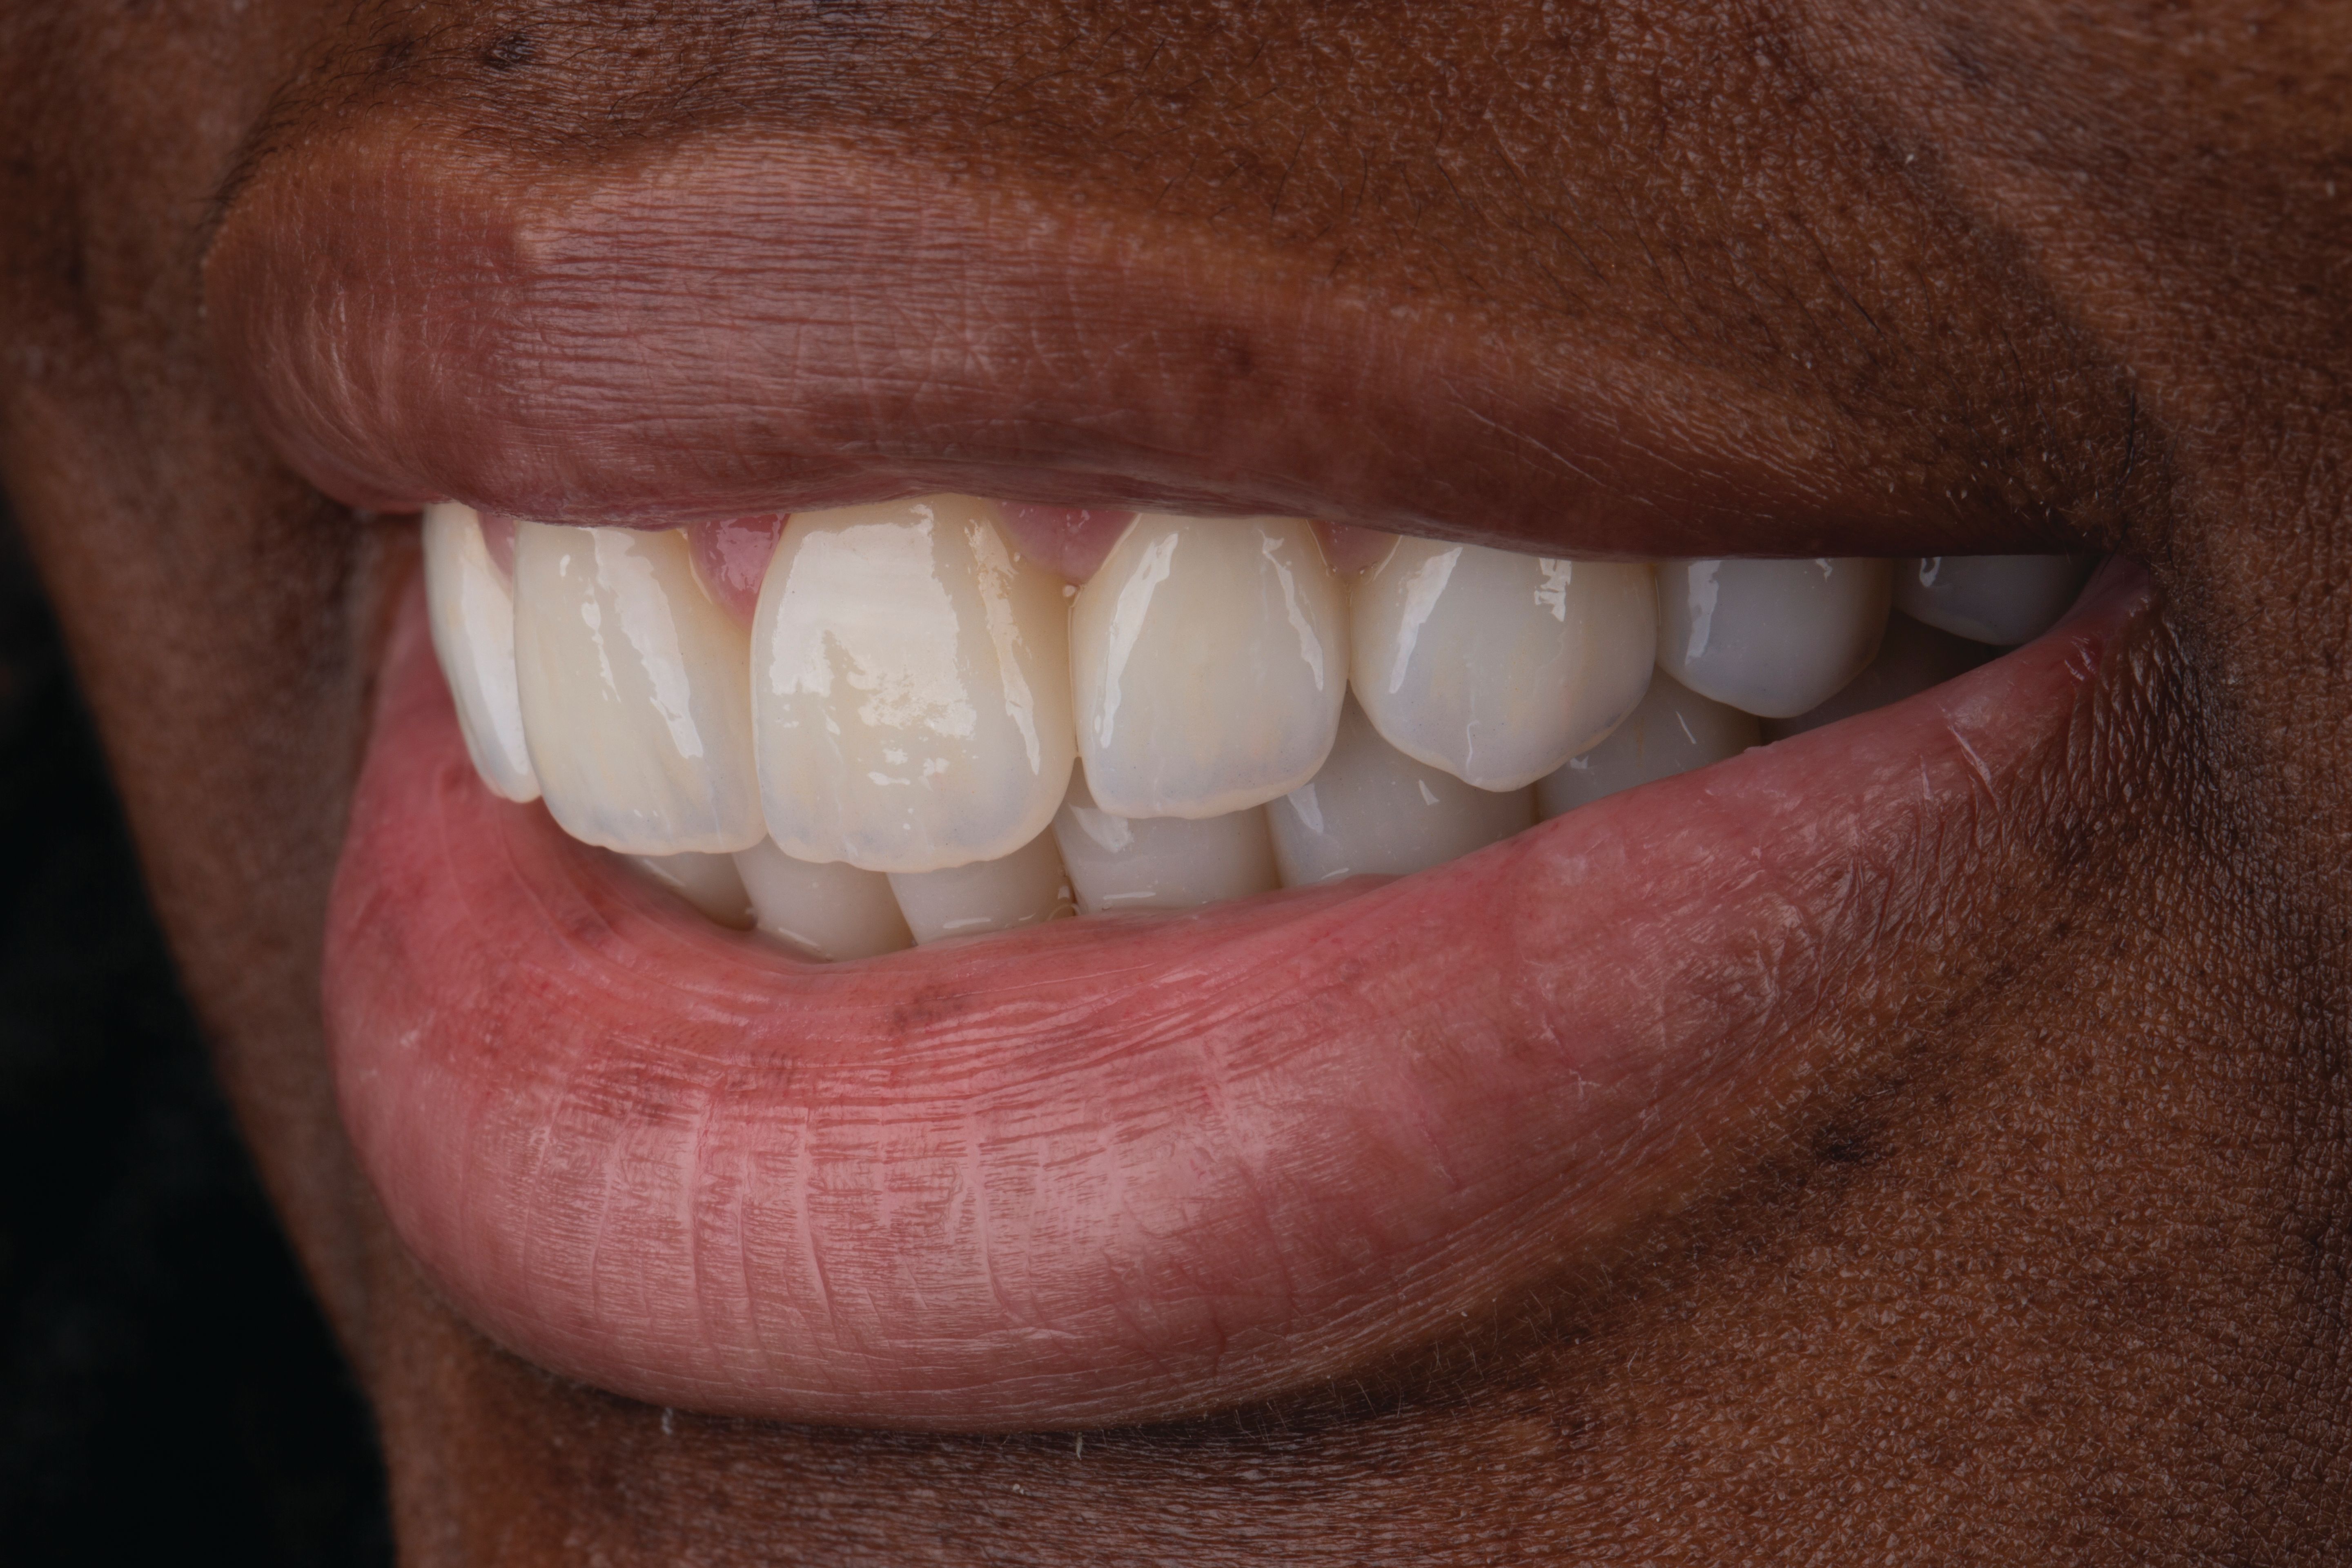 Figure 3: The soft-tissue response to zirconia restorations is comparable to the soft tissue around natural teeth, providing long-term gingival health.